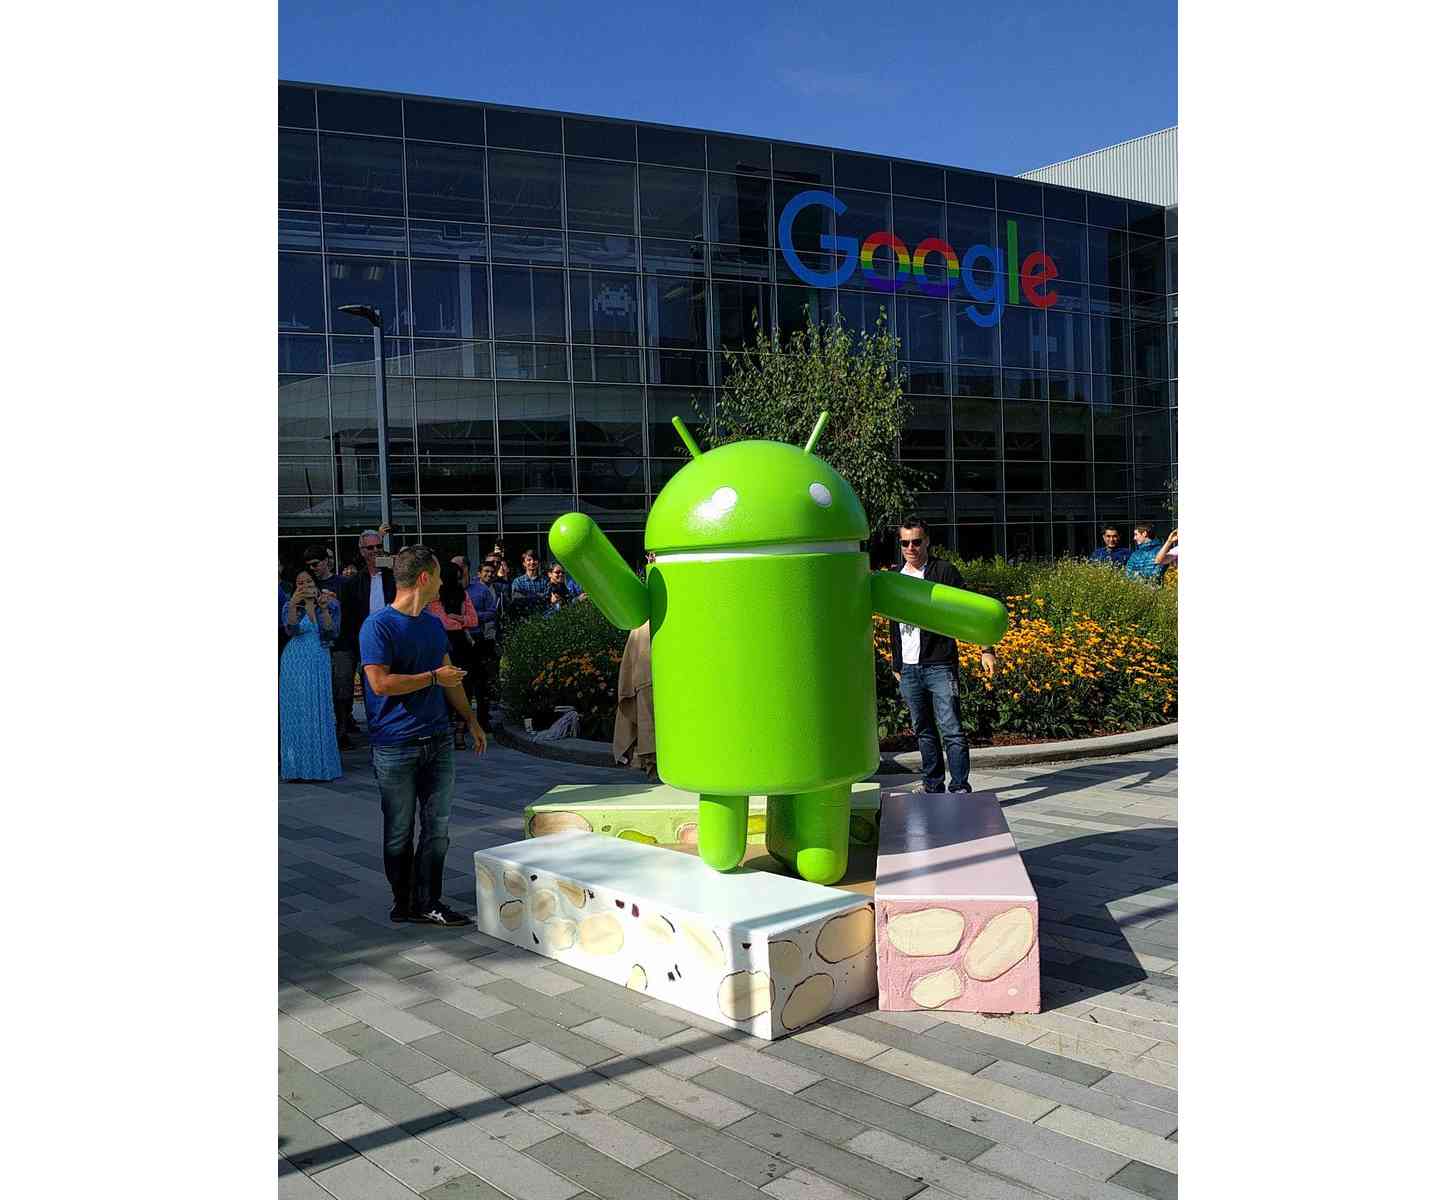 Android 7.0 Nougat statue Google